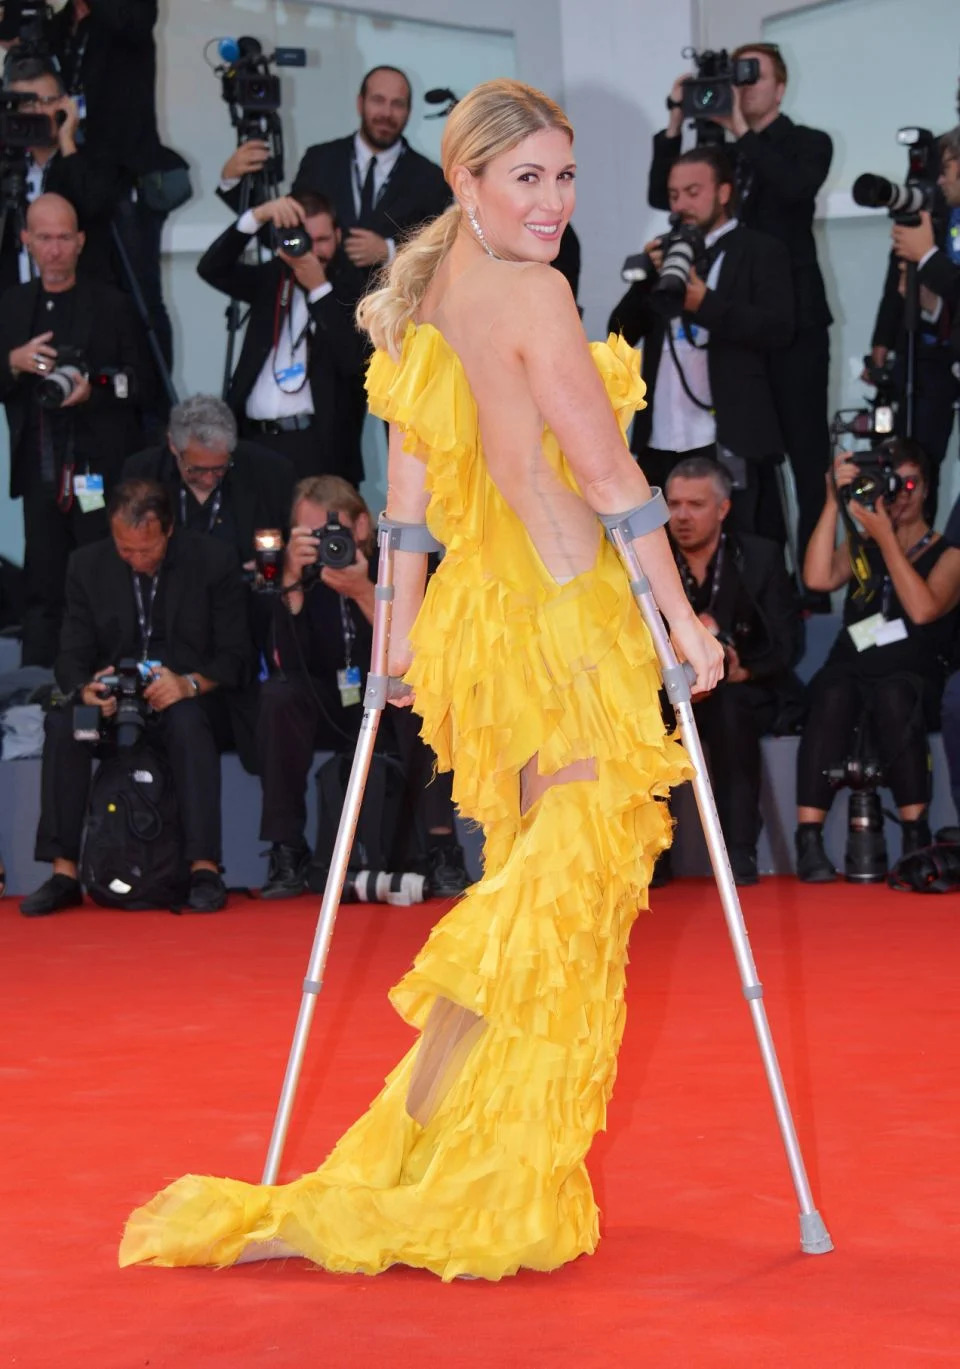 Hofit Golan was also nursing an injury while on the carpet. Source: Getty